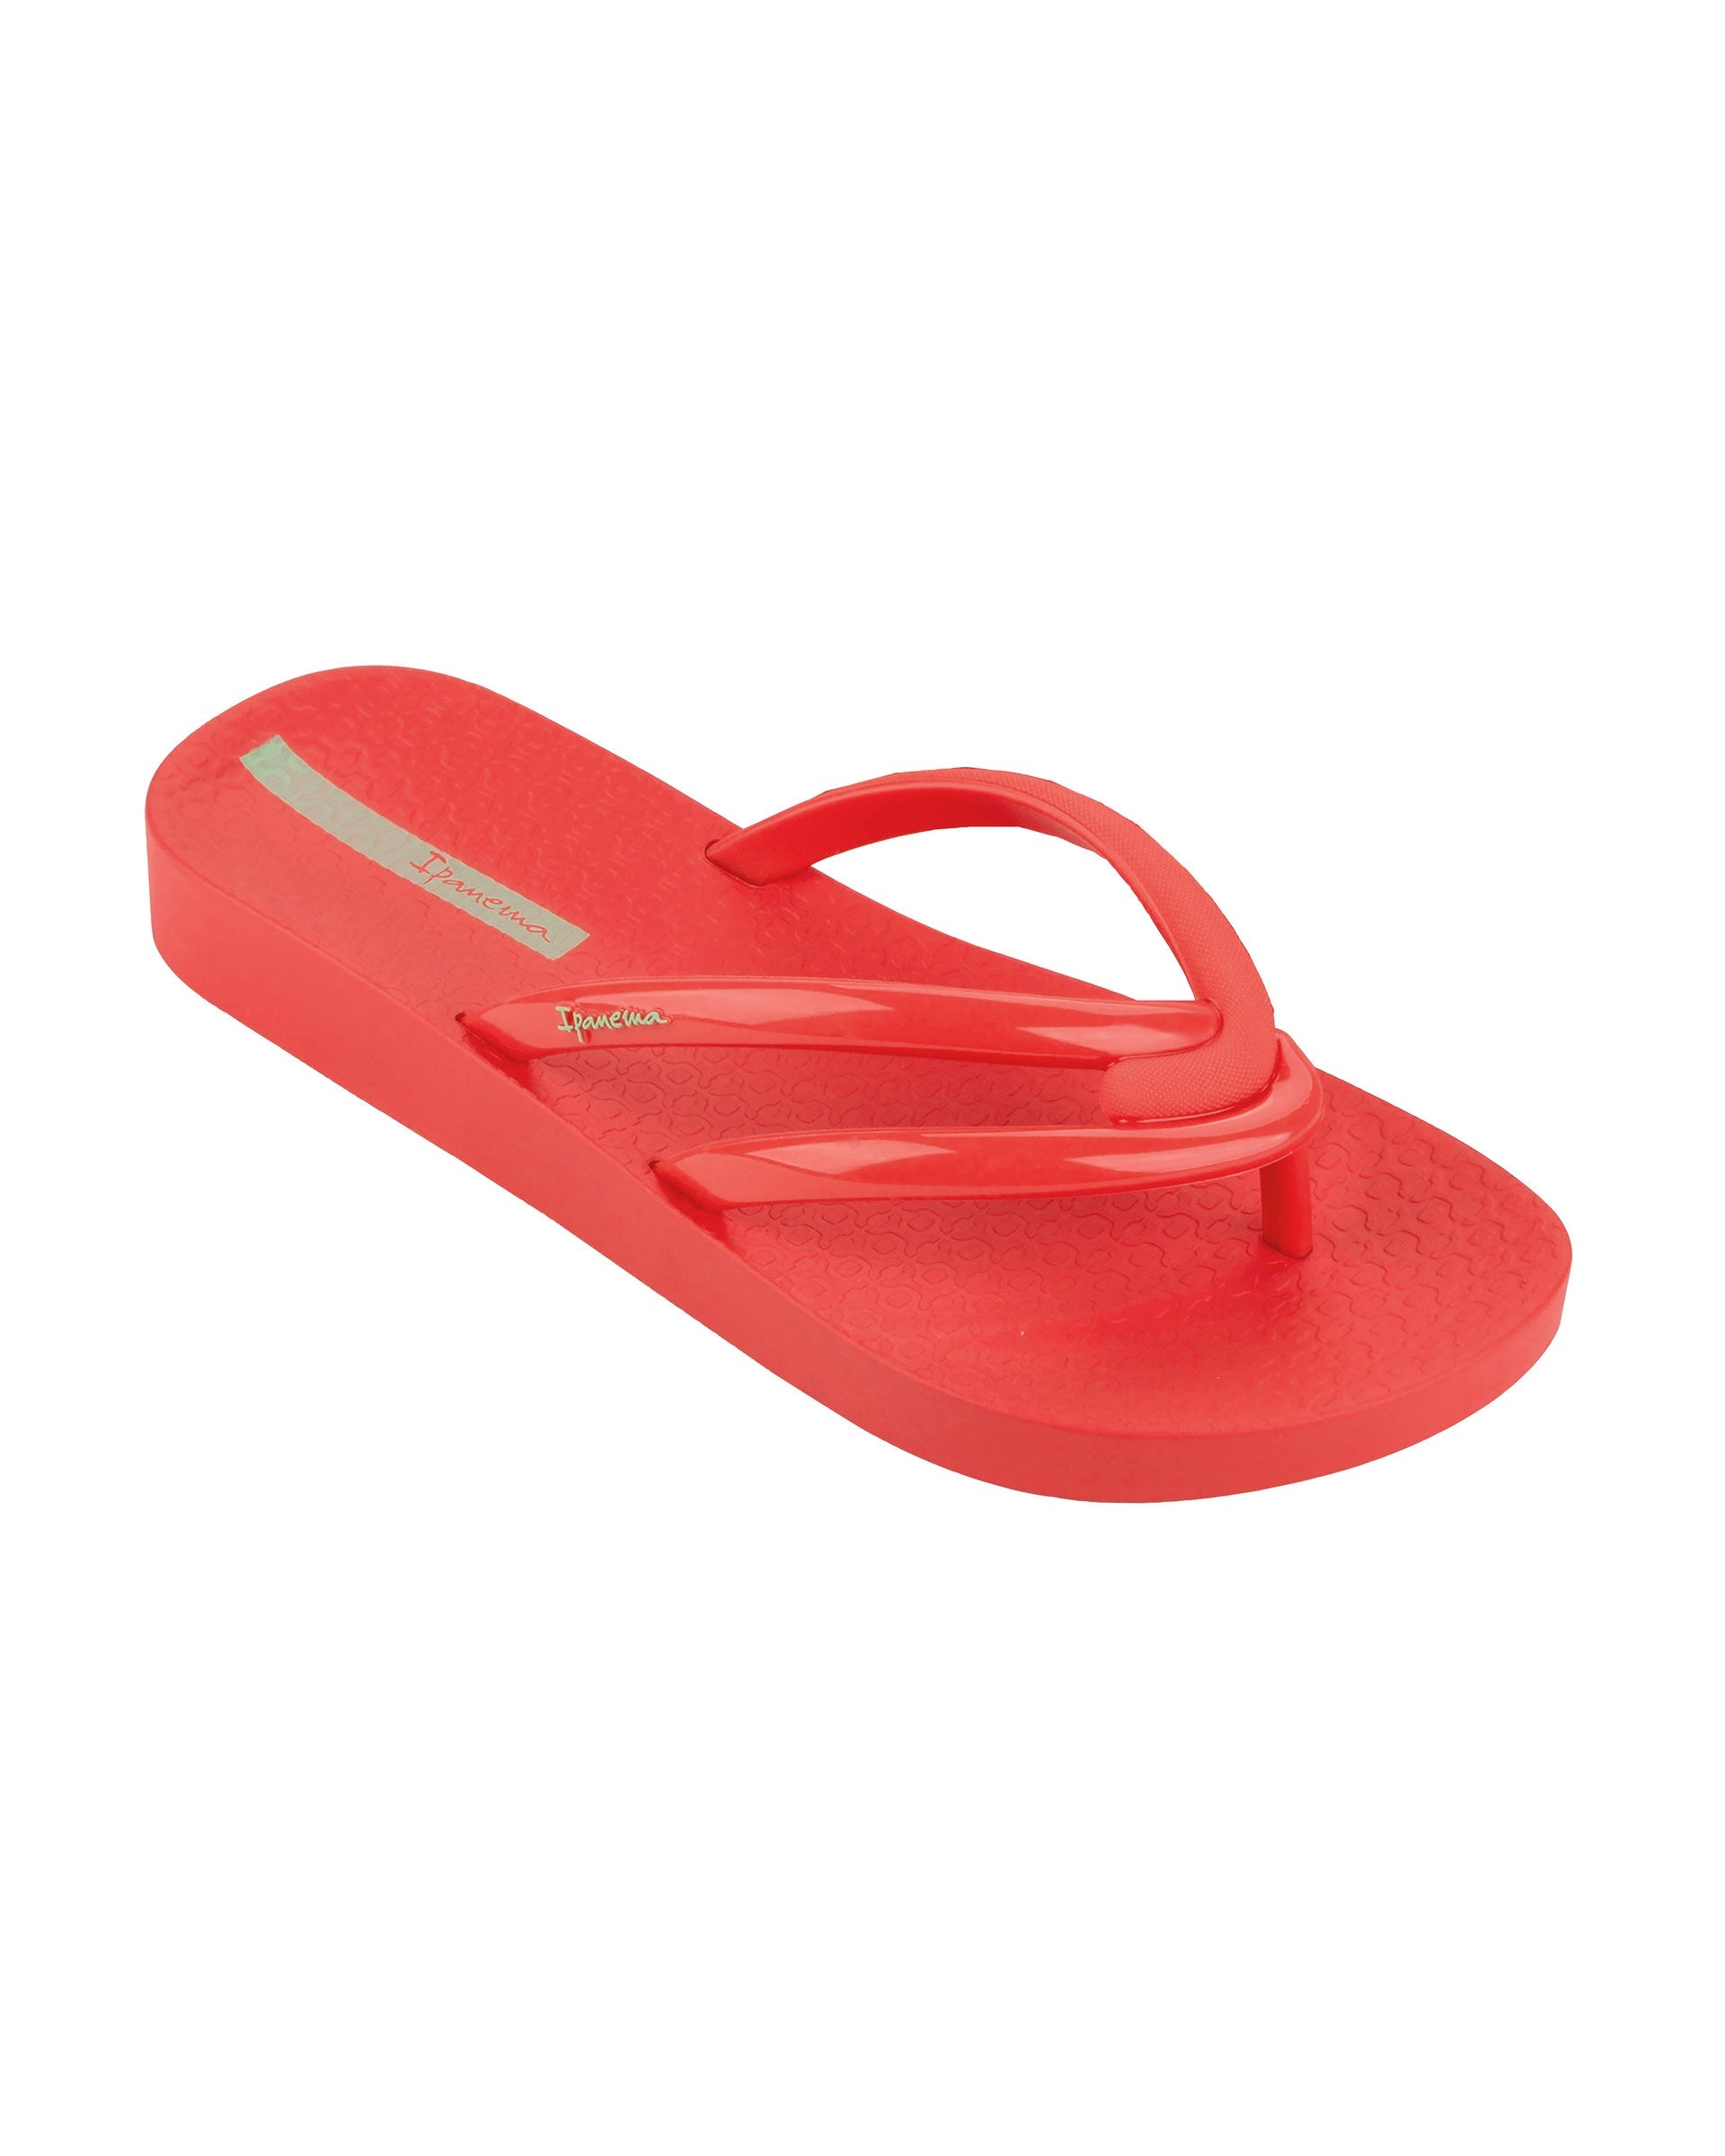 Angled view of a red Ipanema Comfy women's flip flop.